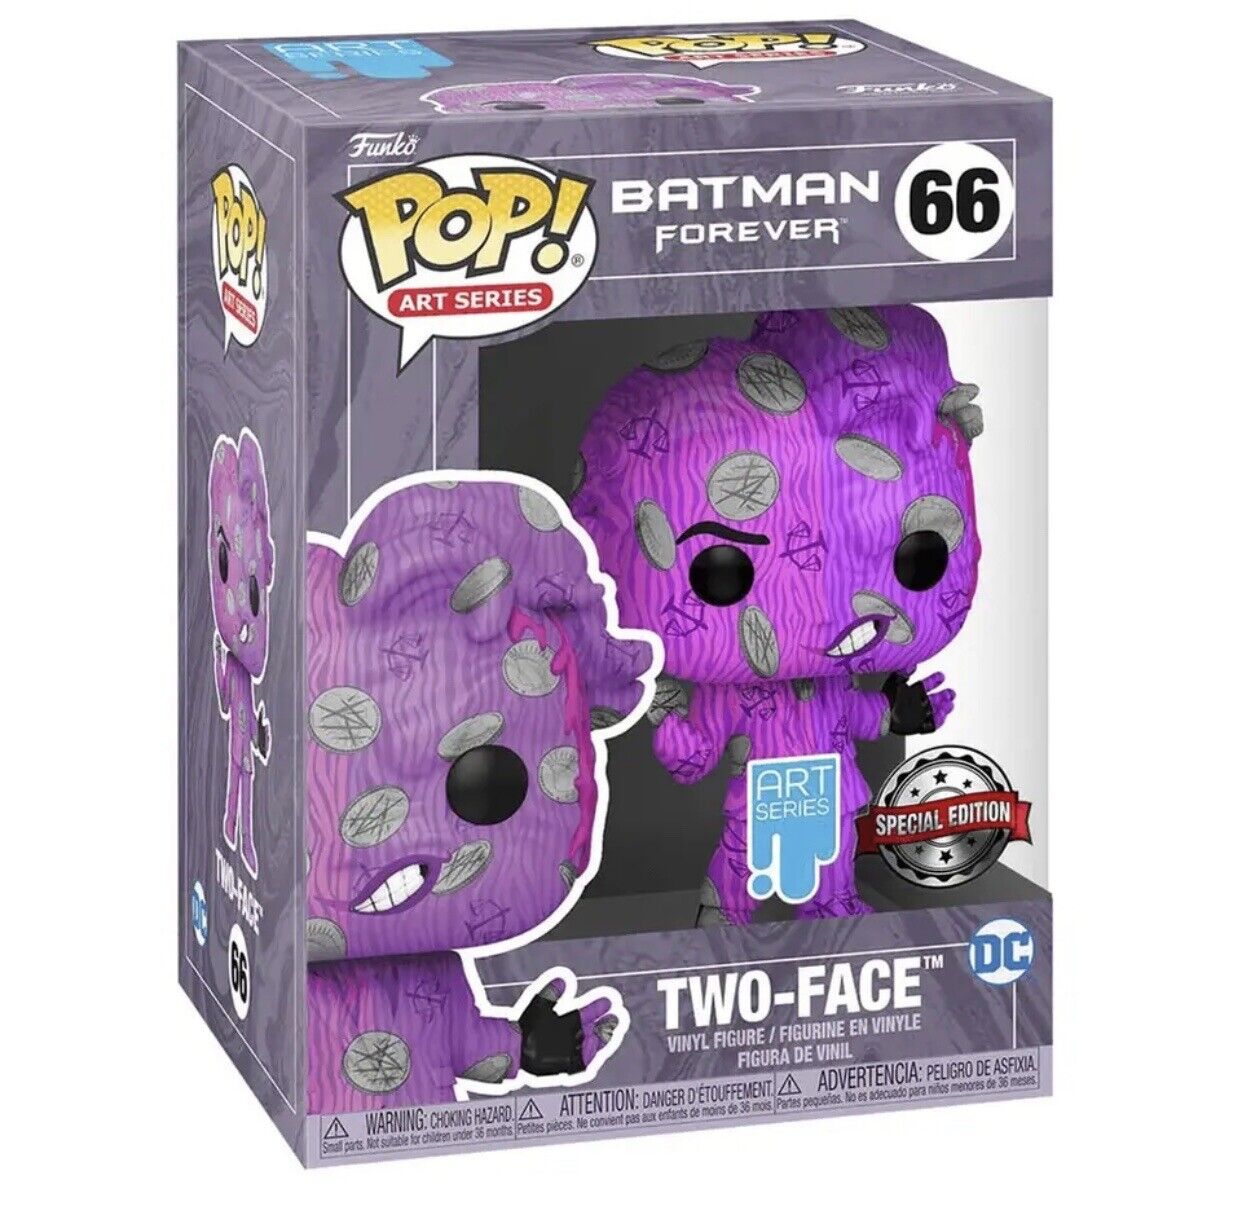 100 Boxes of Funko POP -  Batman Forever 66 - Artist Series: DC - Two-Face